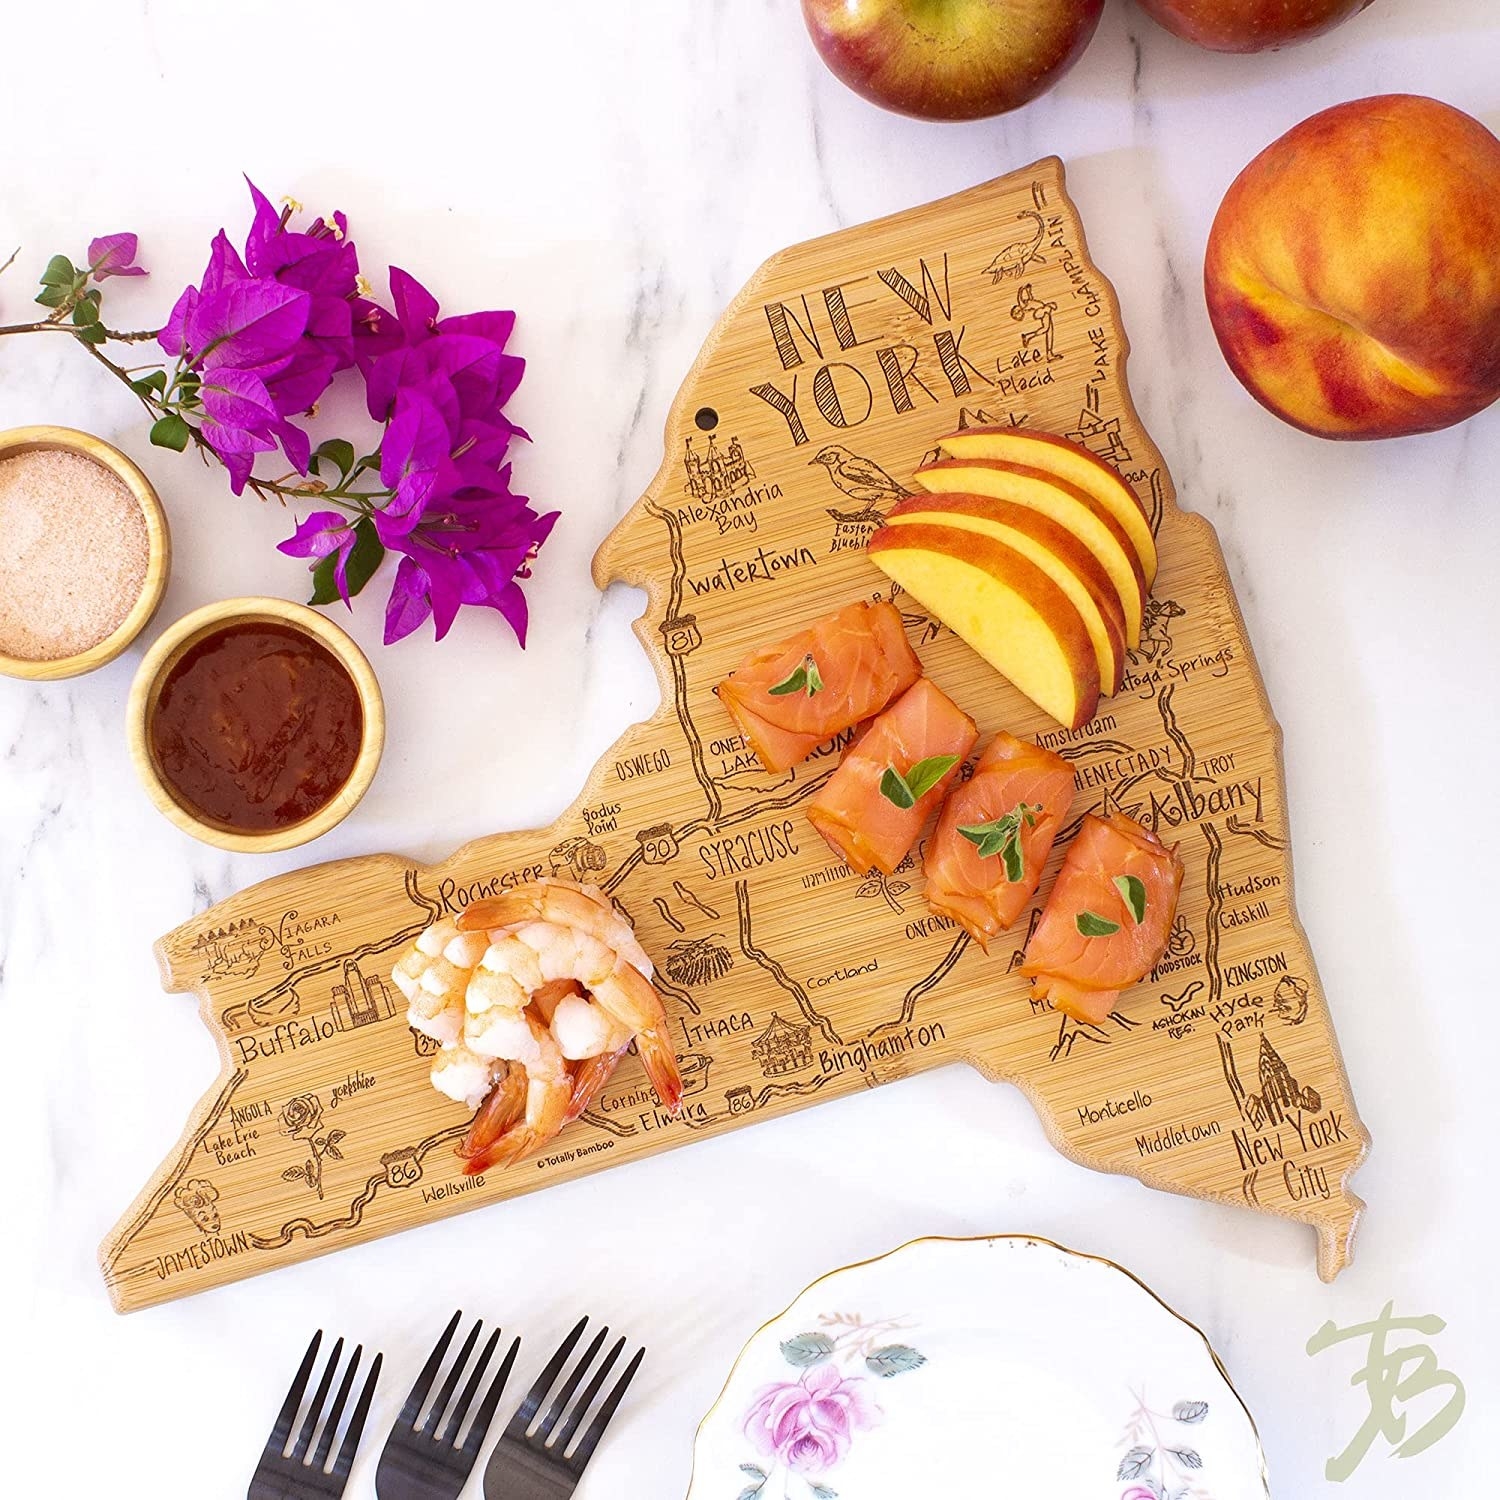 New York State-shaped charcuterie board with engravings of cities/towns and popular attractions under shrimp pieces and smoked salmon rolls